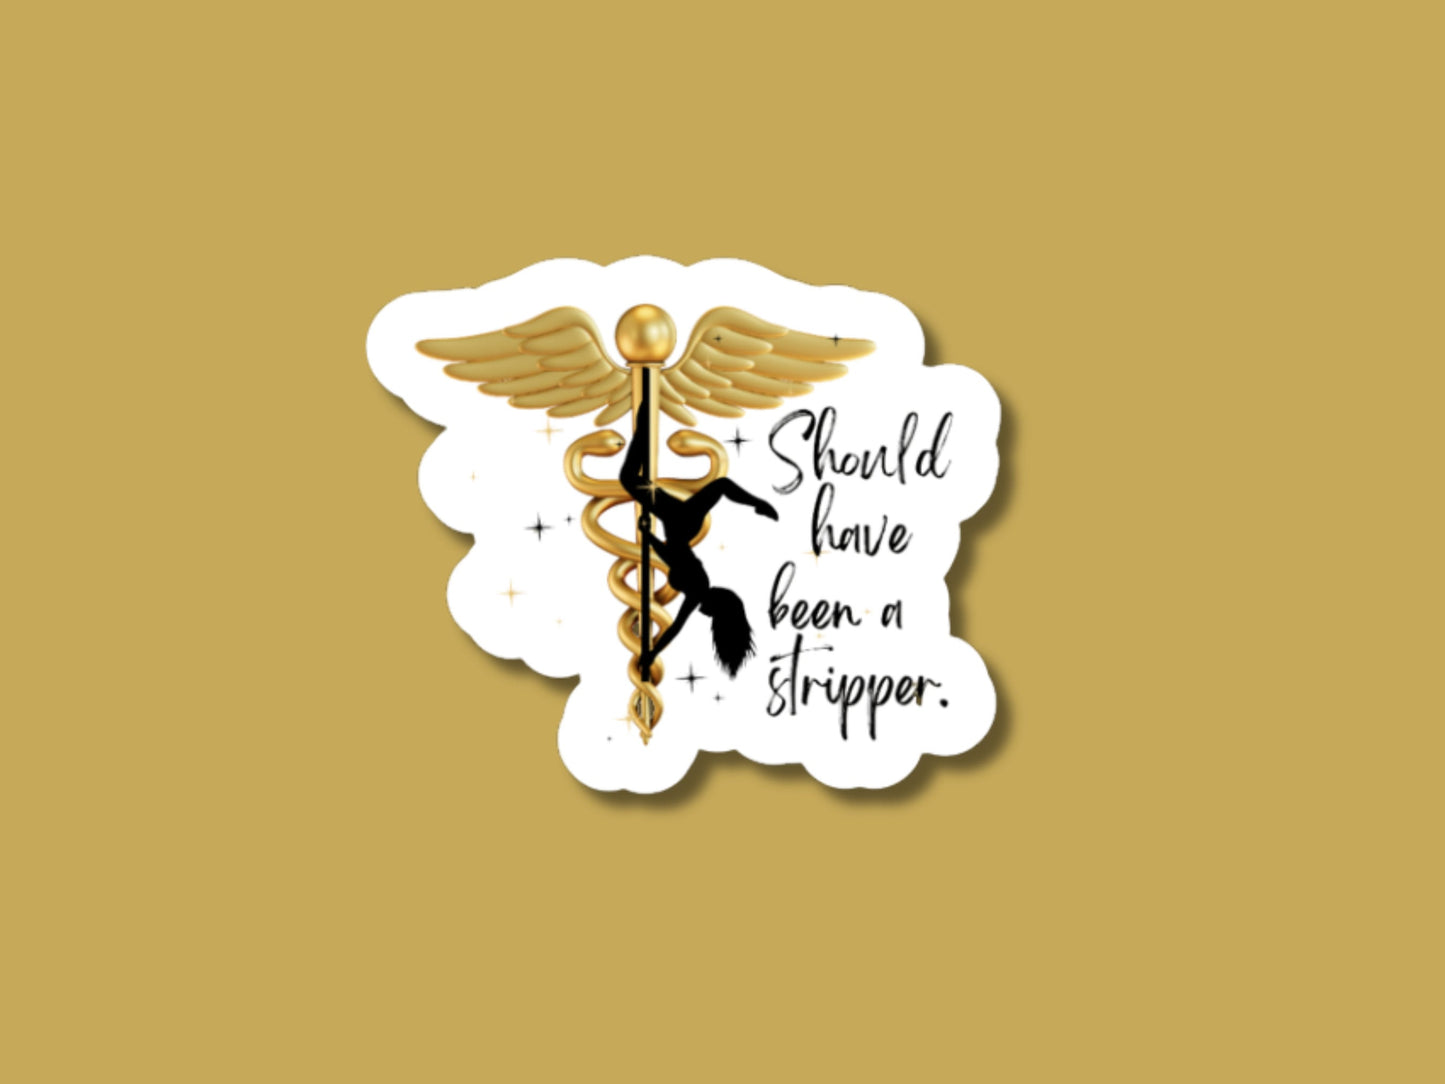 should have been a stripper, respiratory therapy sticker, nurse sticker, physician sticker, funny healthcare sticker, medical caduceus